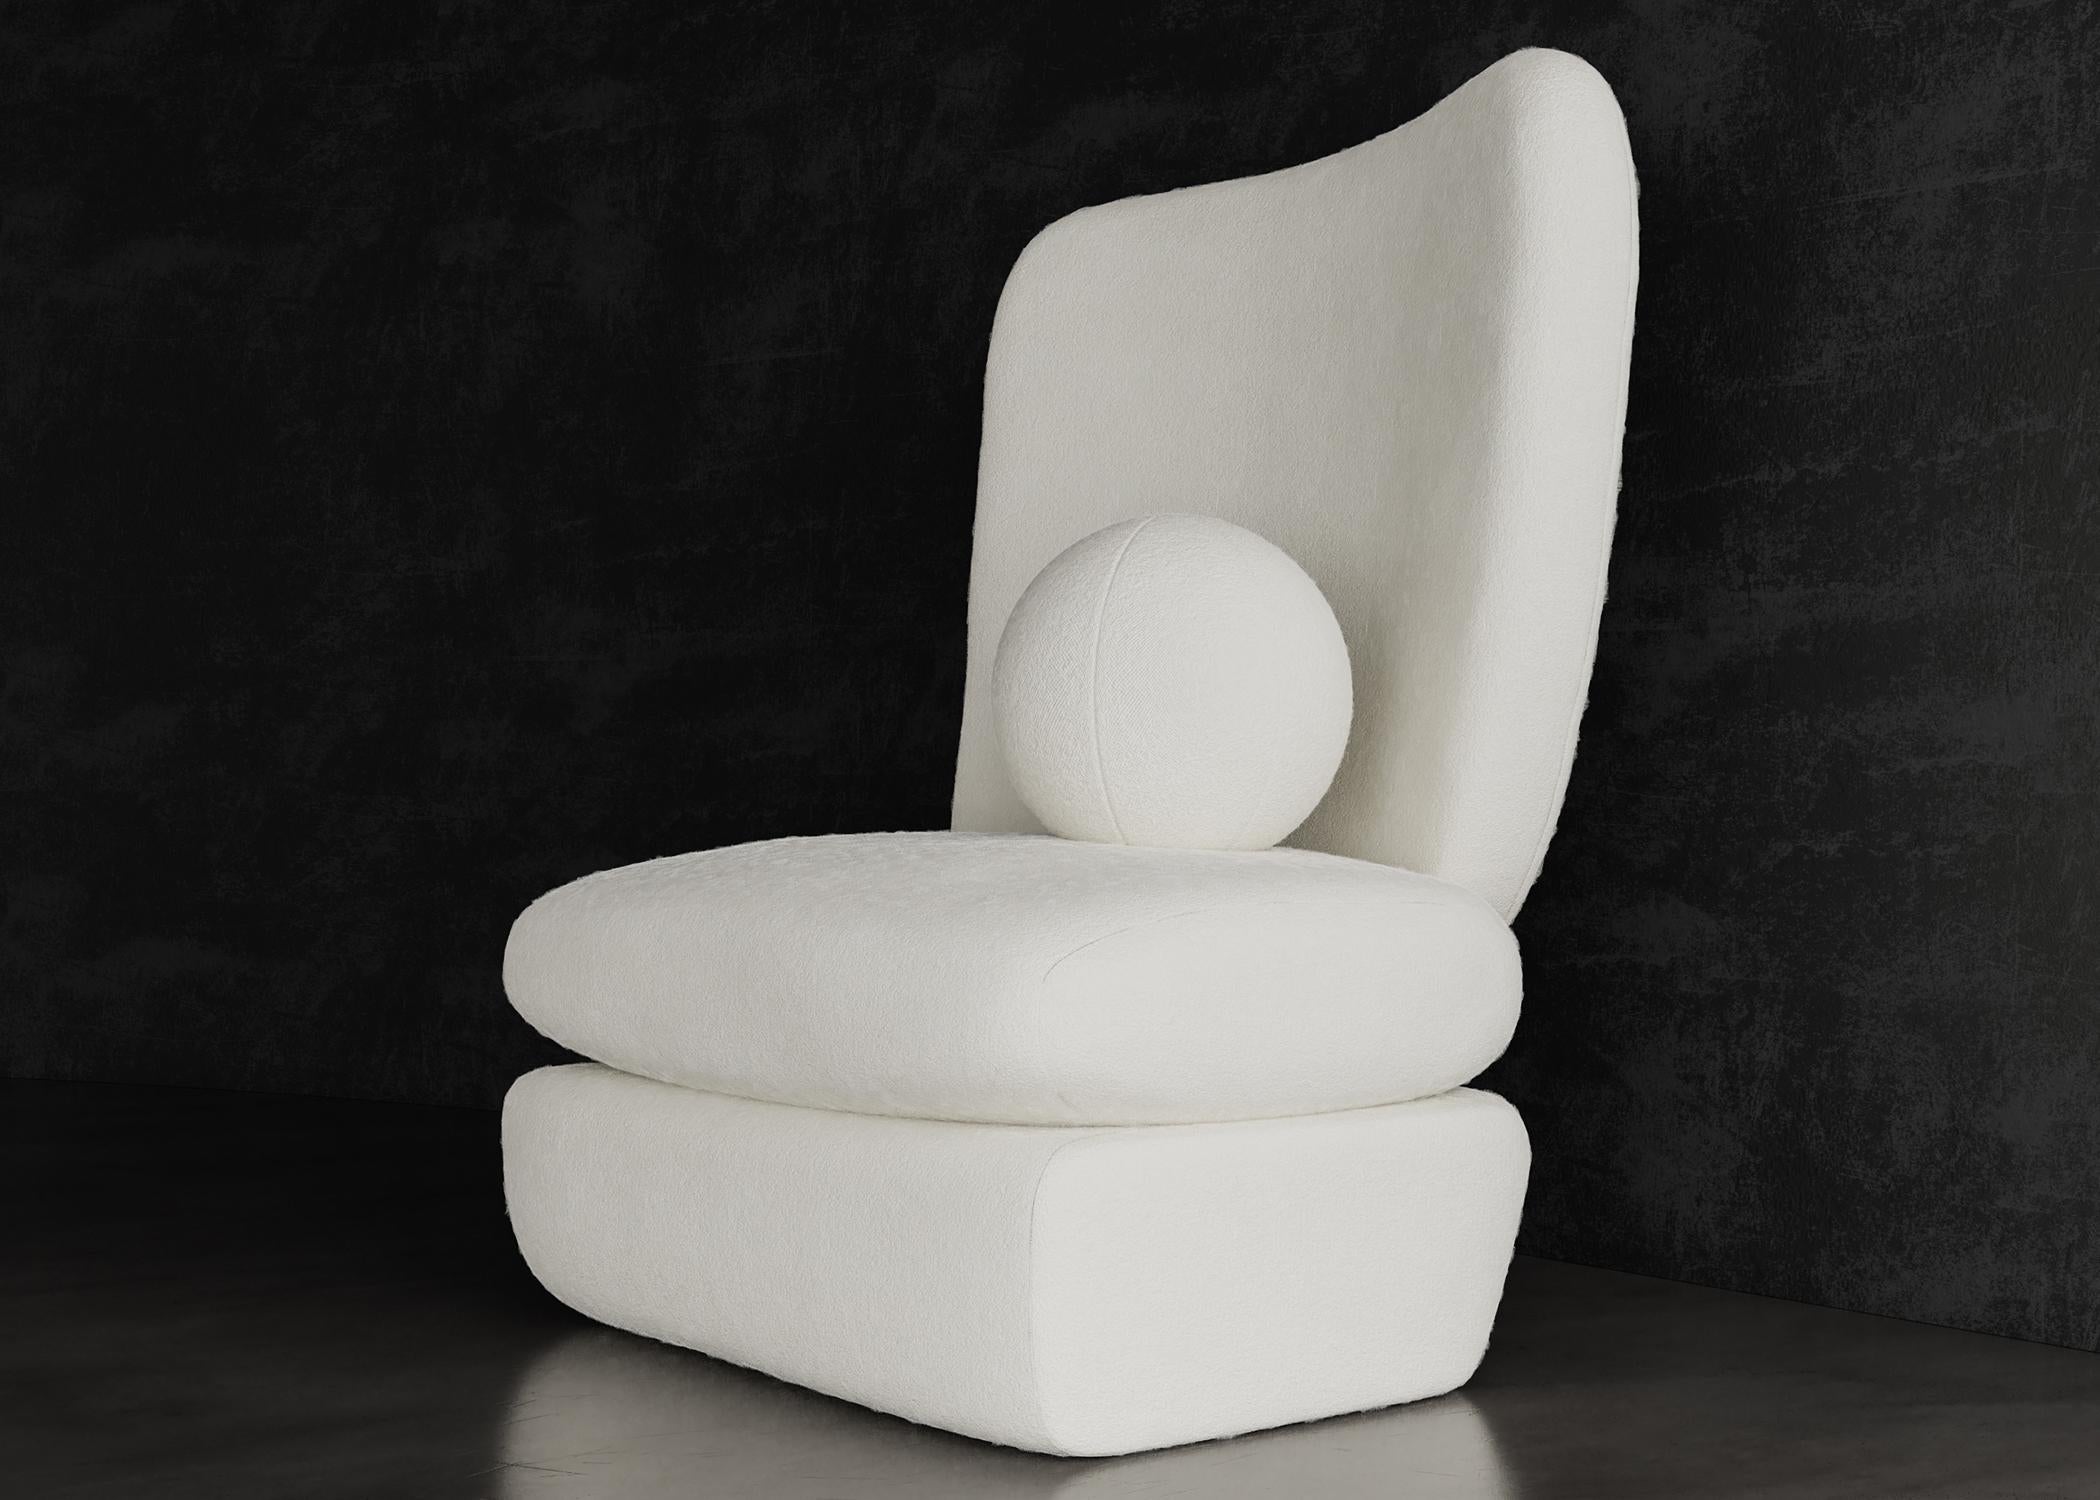 CURVE CHAIR - Modern Layered Asymmetrical Chair in Curly Lamb Boucle

The Curve Chair features layered asymmetrical design elements that are both sophisticated and simple. The unbalanced tension works beautifully together to make a minimal and